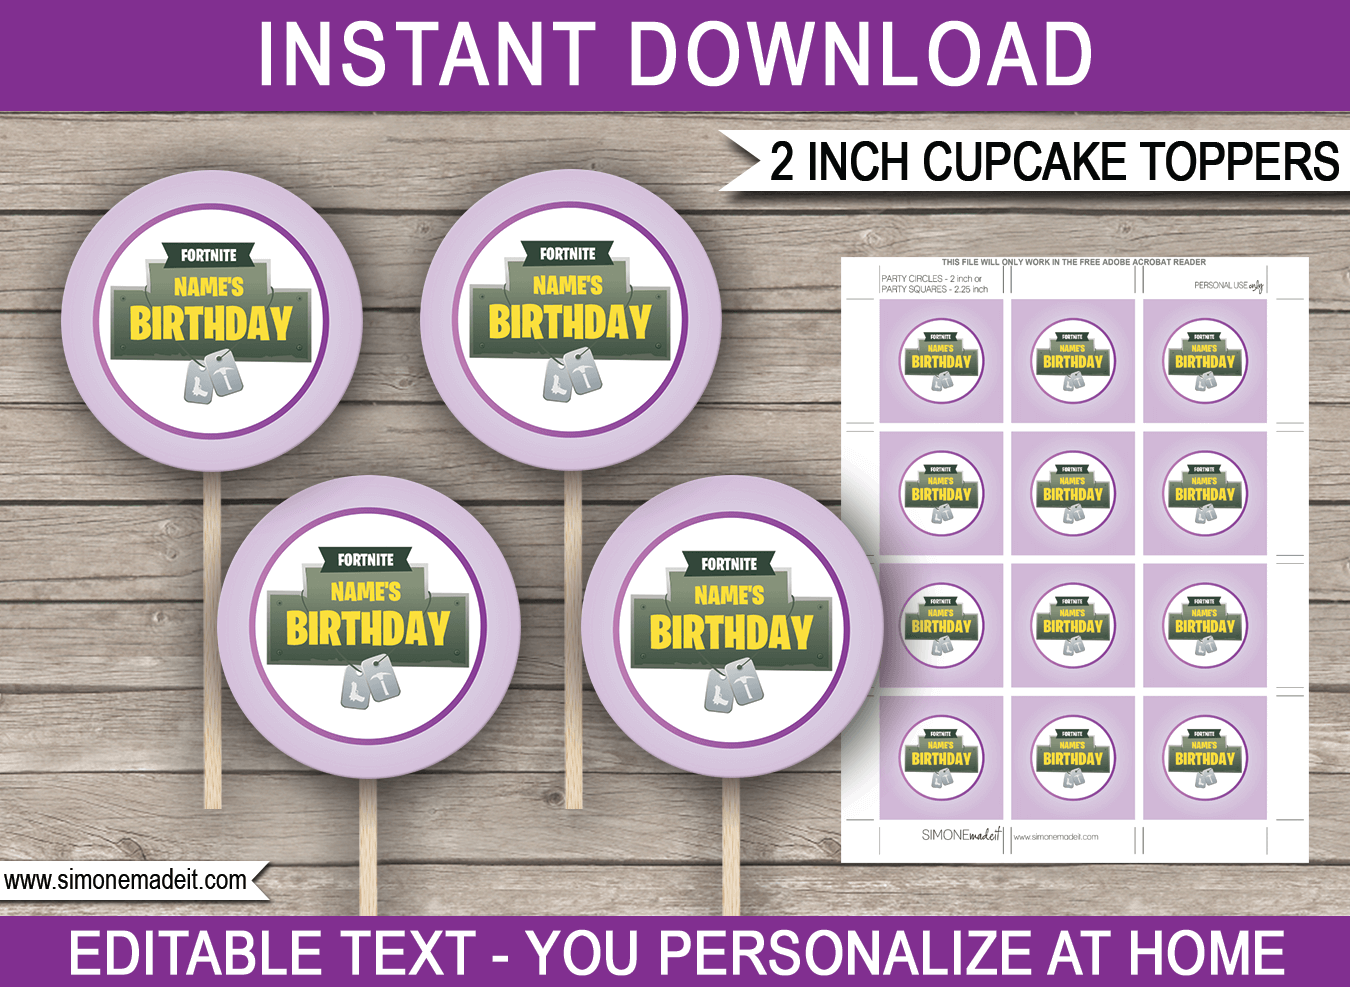 Purple Fortnite Party Cupcake Toppers | Printable Fortnite Birthday Party Decorations | Battle Royale | 2 inch | Gift Tags | DIY Editable & Printable Template | INSTANT DOWNLOAD via simonemadeit.com